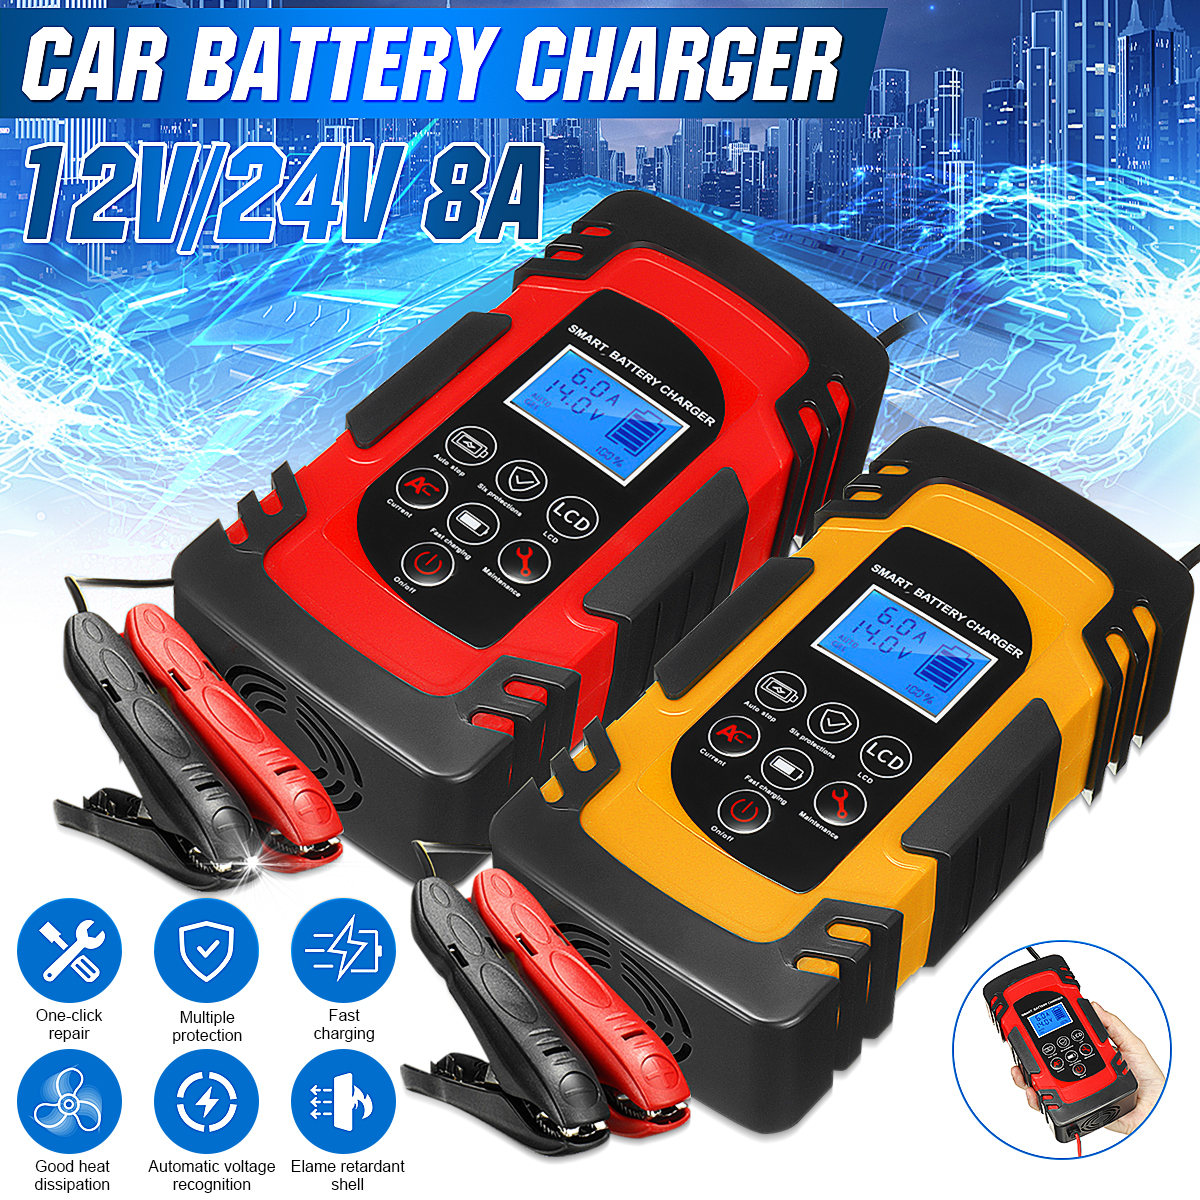 Smart-Automatic-12V24V-8A-Car-Battery-Charger-Motorcycle-Repair-Pulse-Repair-Activation-1855796-1